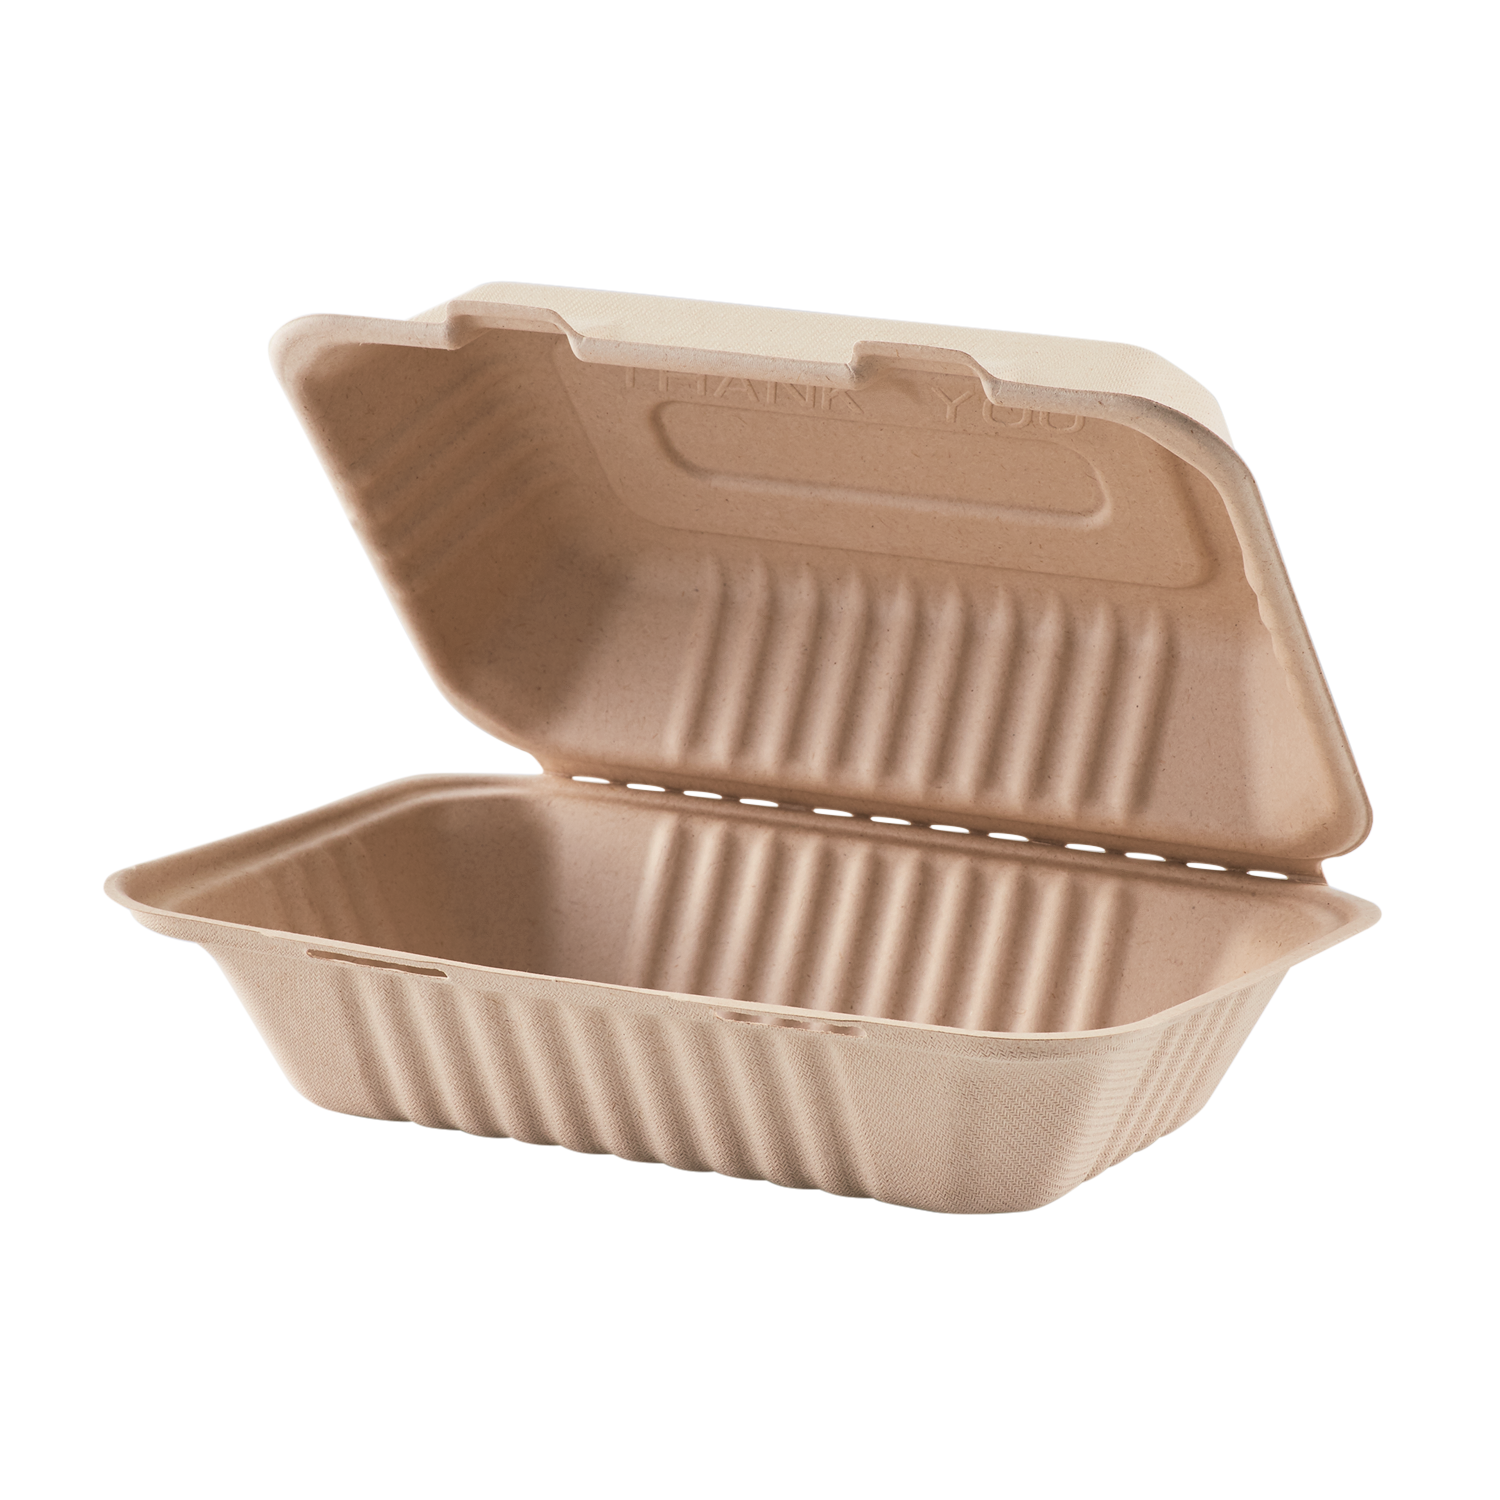 Disposable Food Containers with Lids for Takeout Food